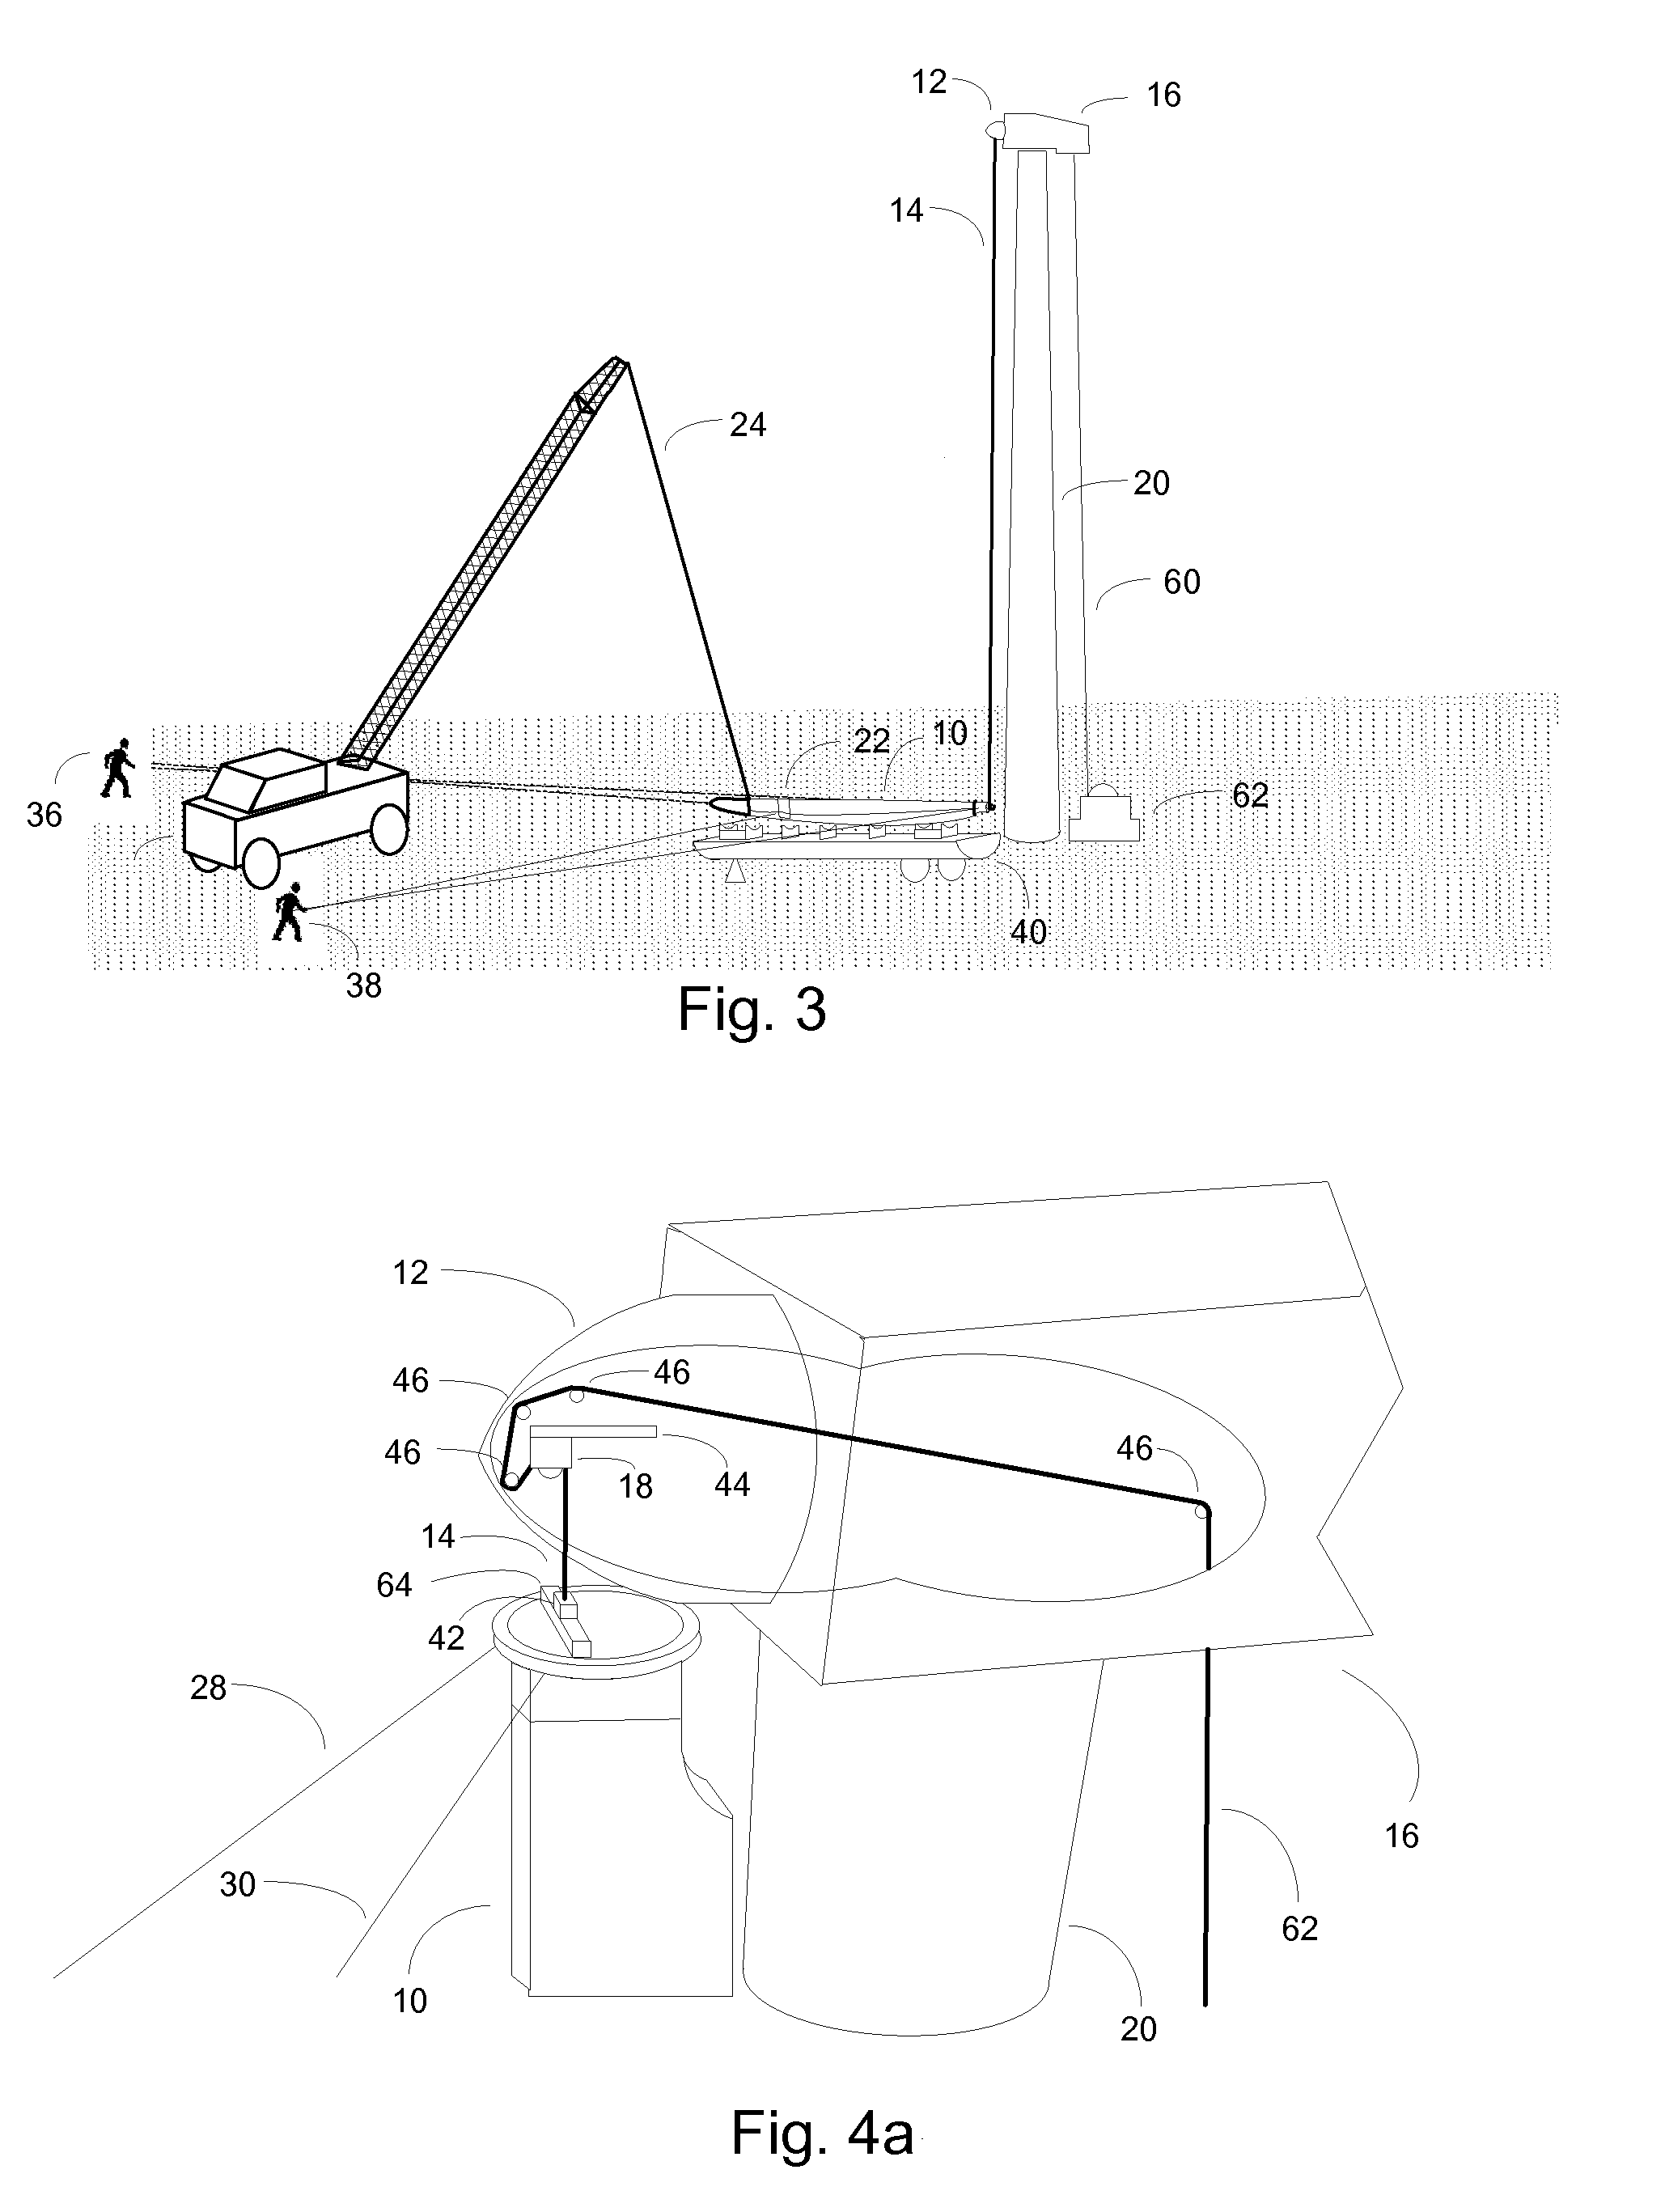 Method for lowering and raising a wind turbine blade